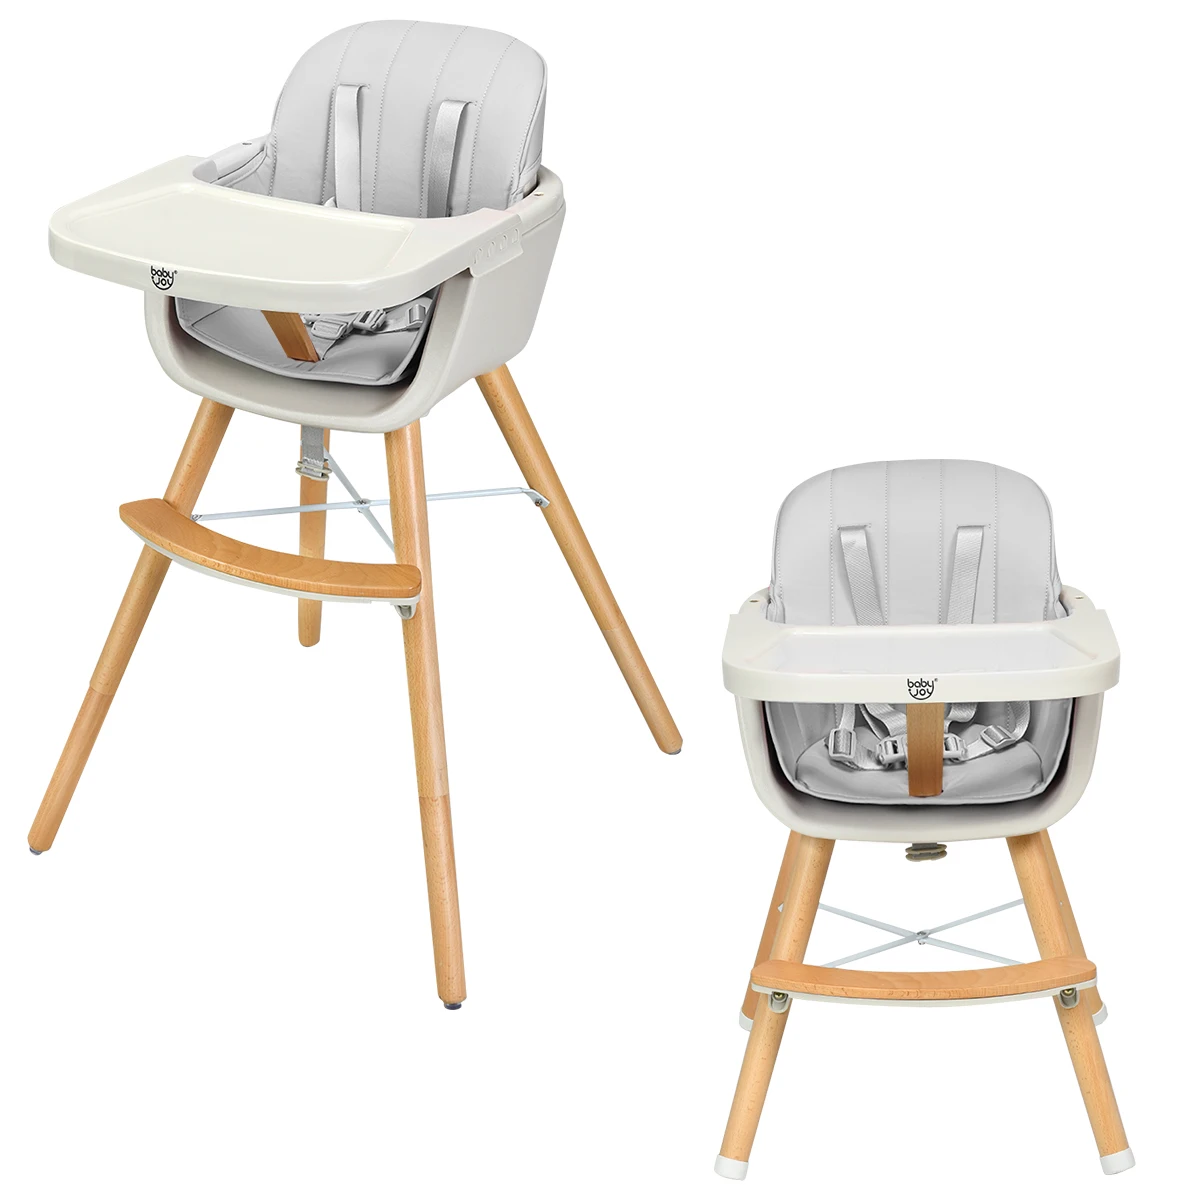 3 in 1 Convertible Wooden High Chair Baby Toddler Highchair w/ Cushion Gray